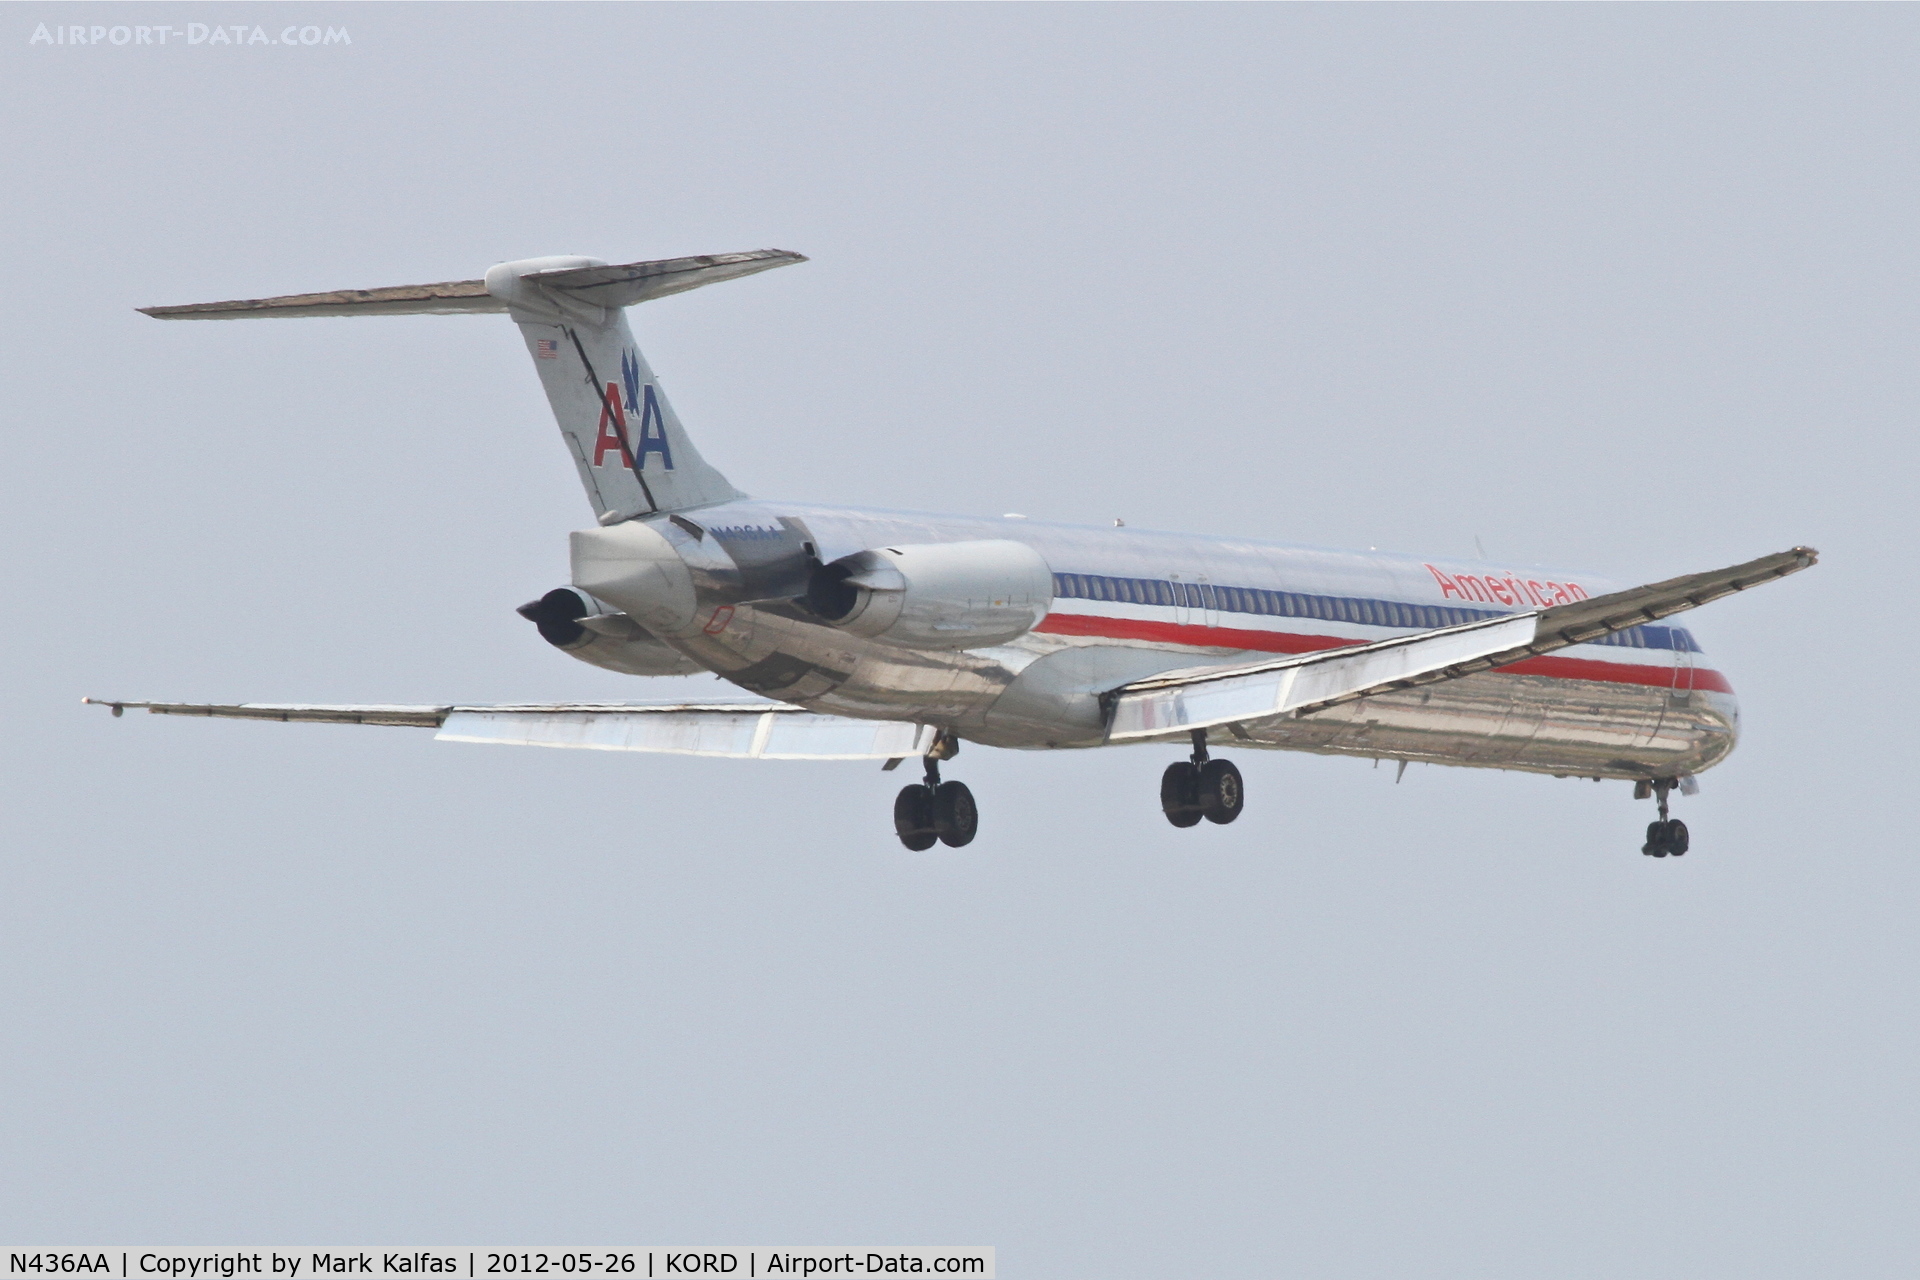 N436AA, 1987 McDonnell Douglas MD-83 (DC-9-83) C/N 49454, American Airlines Mcdonnell Douglas DC-9-83, AAL408 arriving from Southwest Florida Intl'l/KRSW, RWY 10 approach KORD.